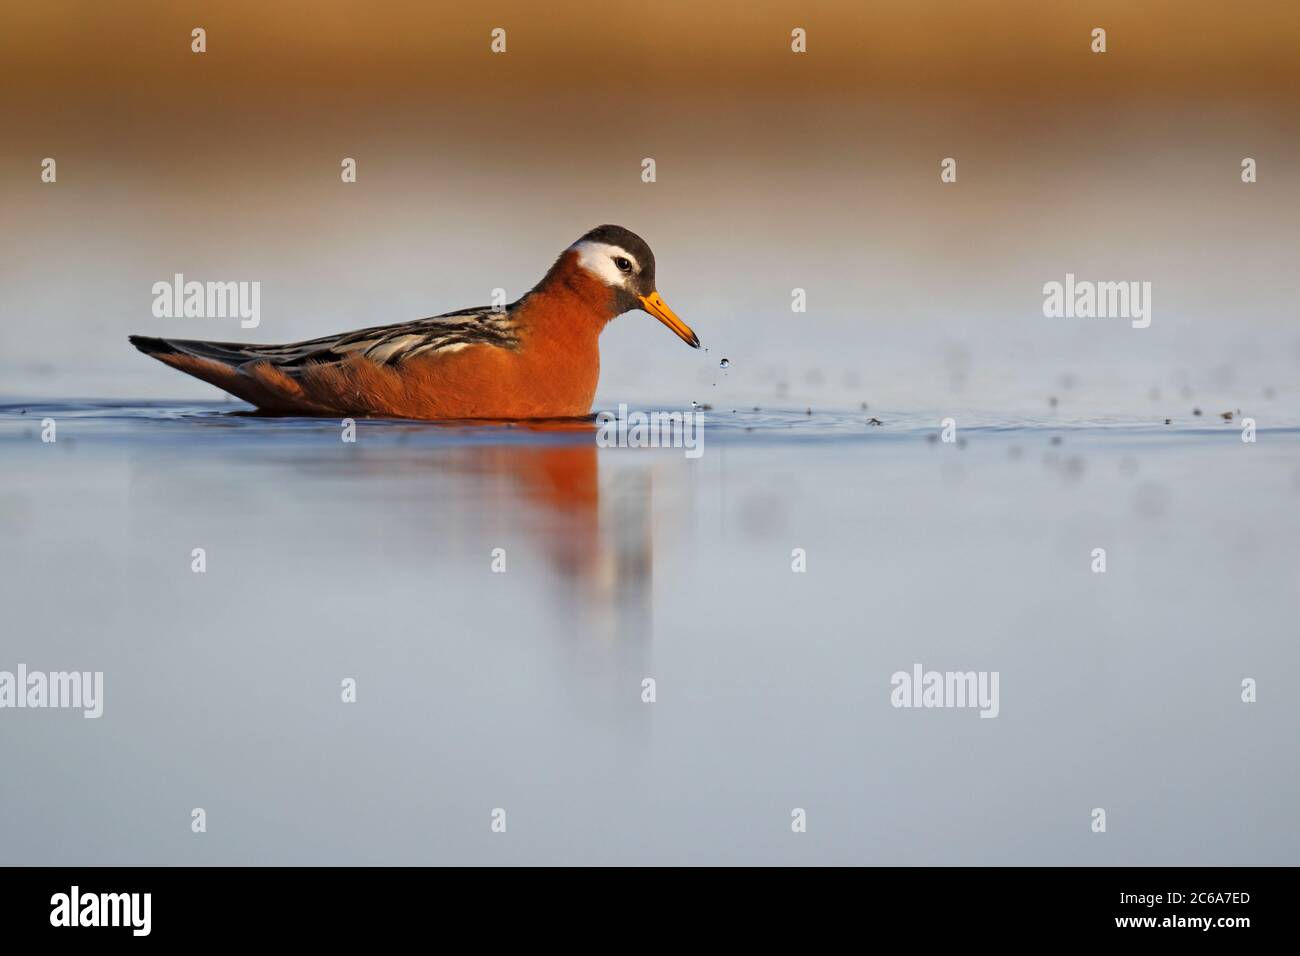 Adult Red Phalarope (Phalaropus fulicarius) in Alaska, United States, in summer plumage. Pickung up insects from the water surface. Stock Photo